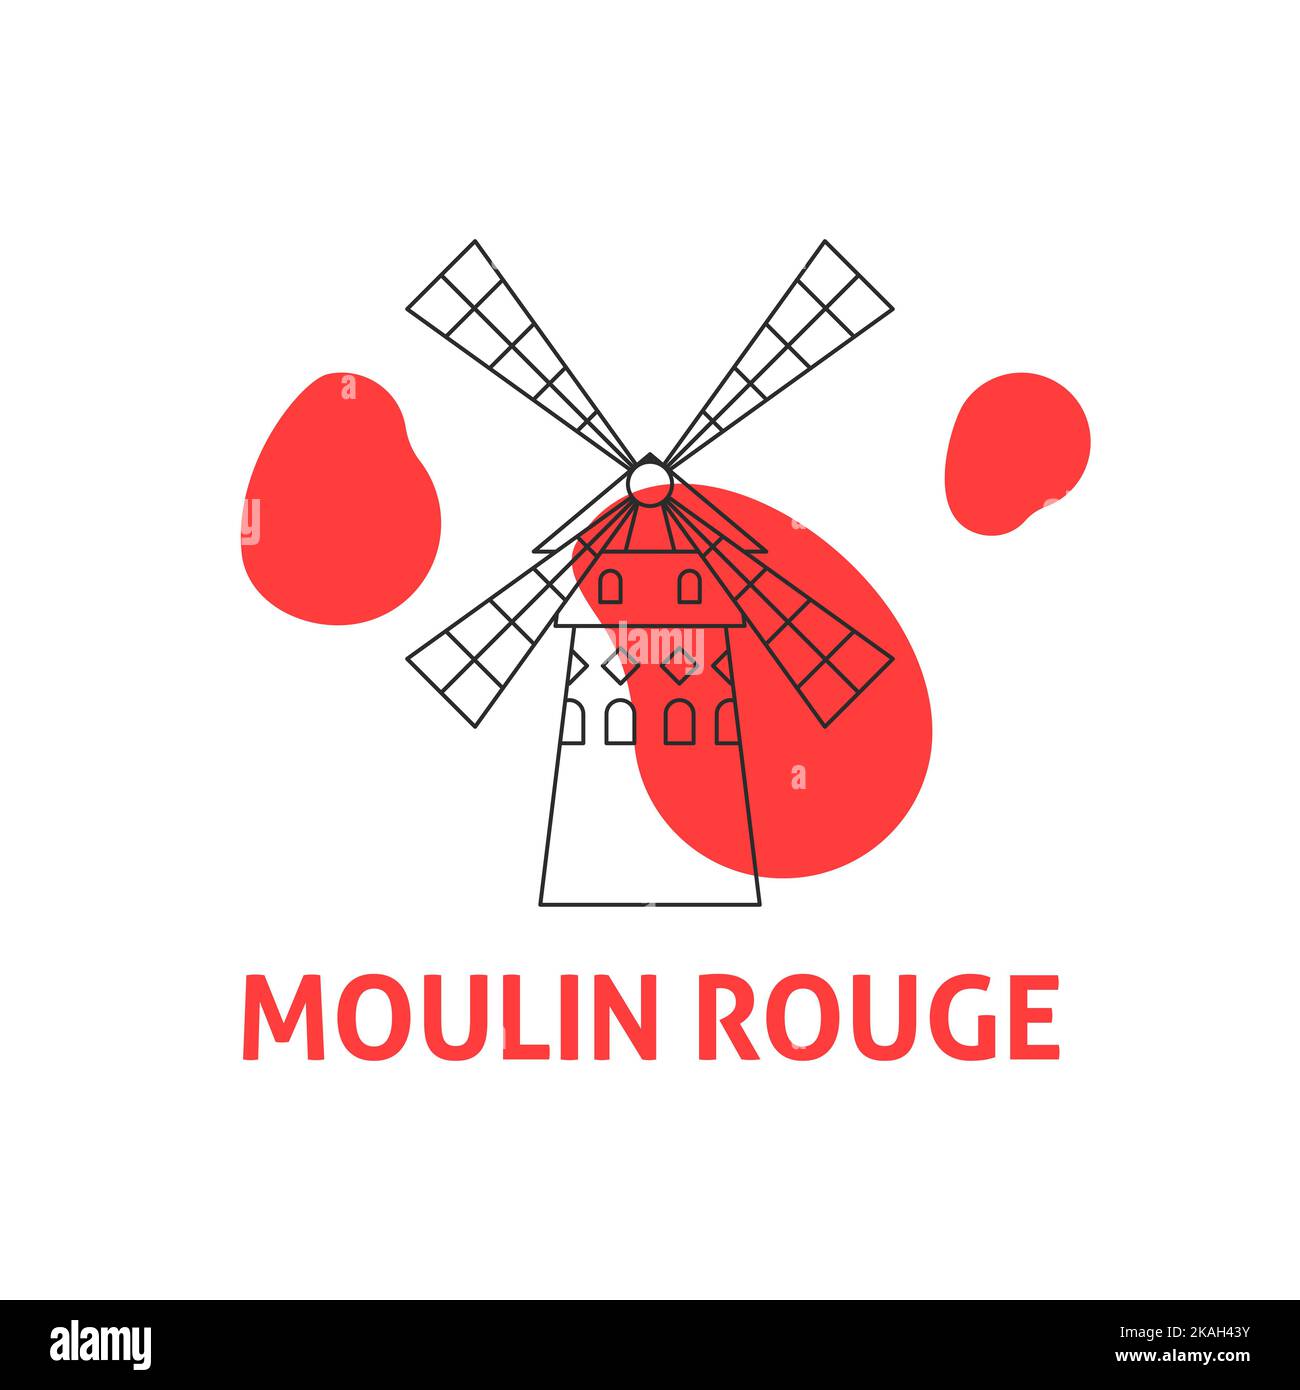 Moulin Rouge Line Concept Stock Vector